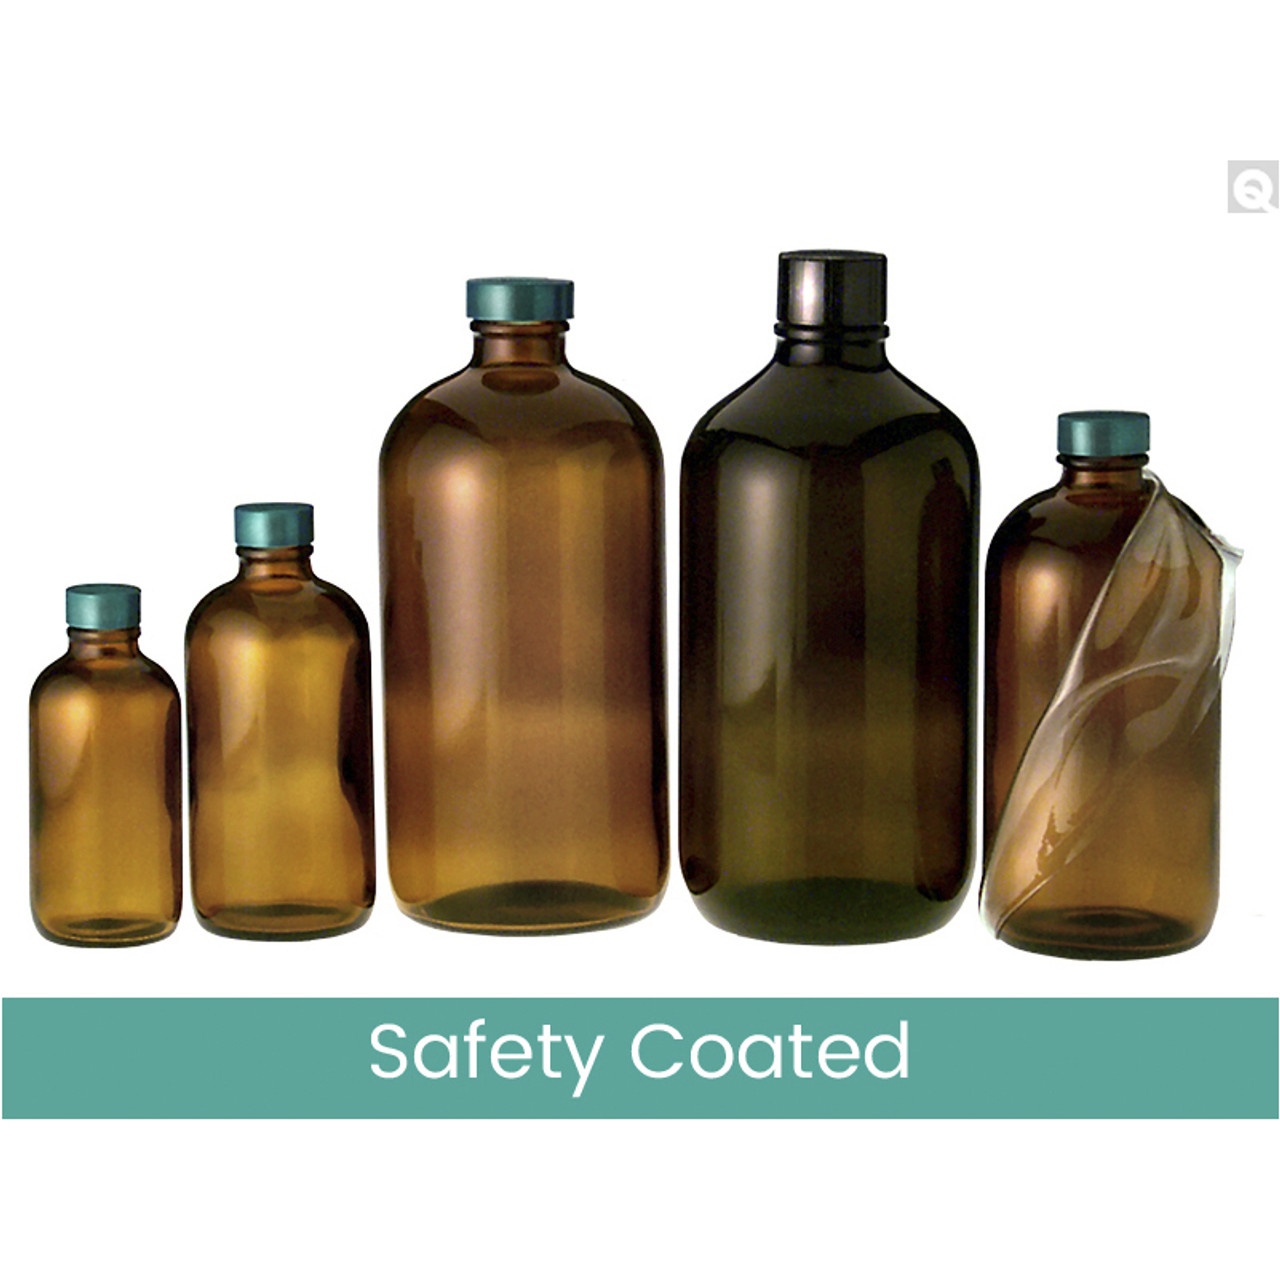 https://cdn11.bigcommerce.com/s-3yvzqa/images/stencil/1280x1280/products/51567/90714/Bottles_Safety_Coated_Boston_Rounds_Amber__29883.1615581061.jpg?c=2